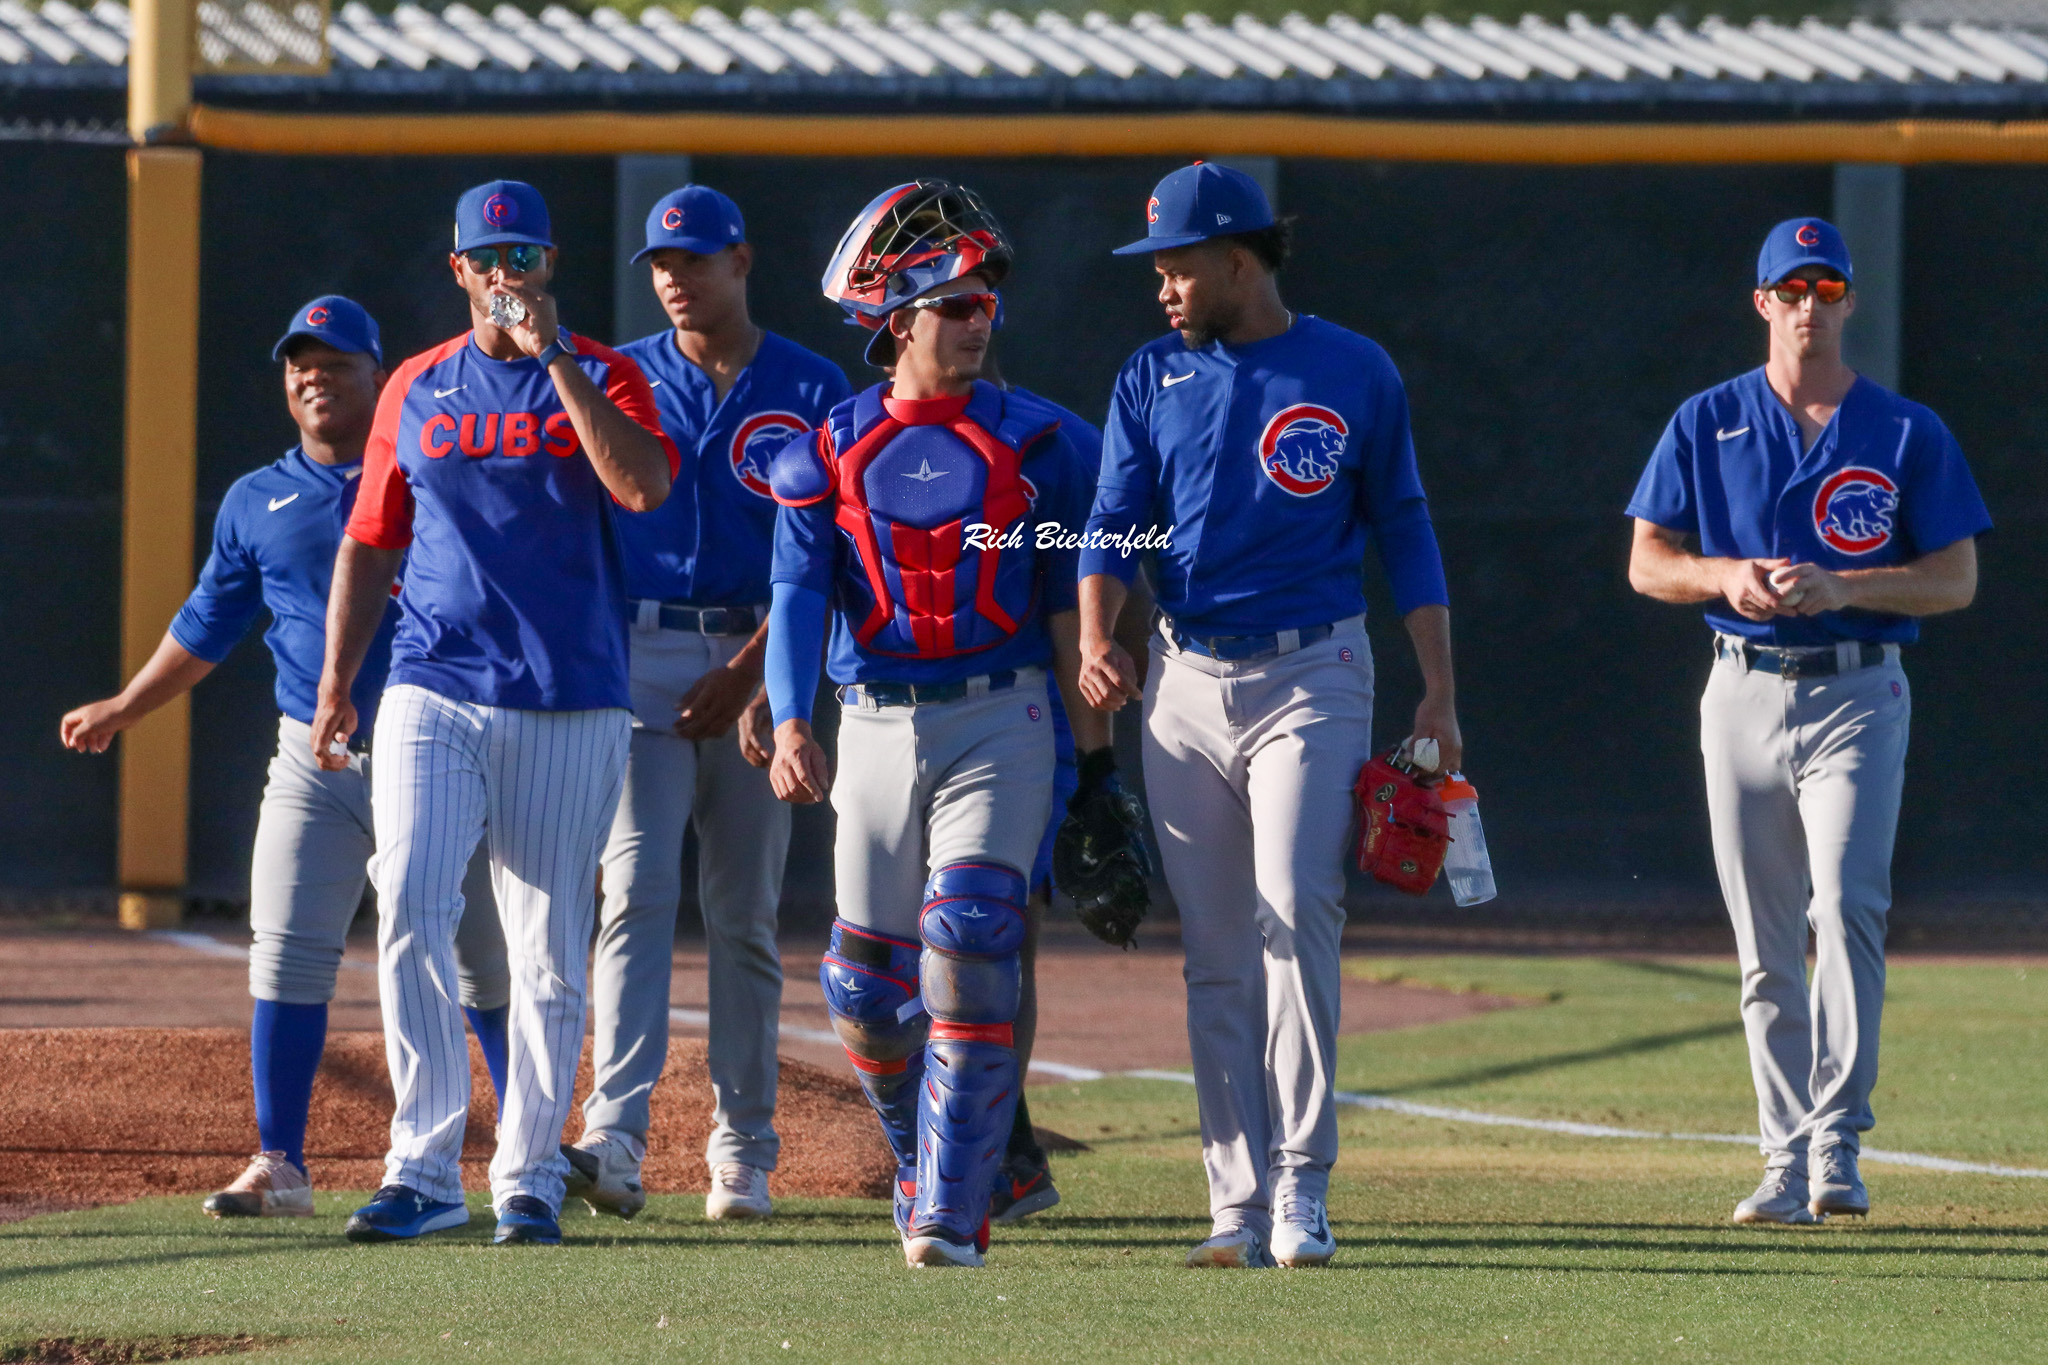 Cubs rookie Ethan Roberts to undergo Tommy John surgery: 'Tough